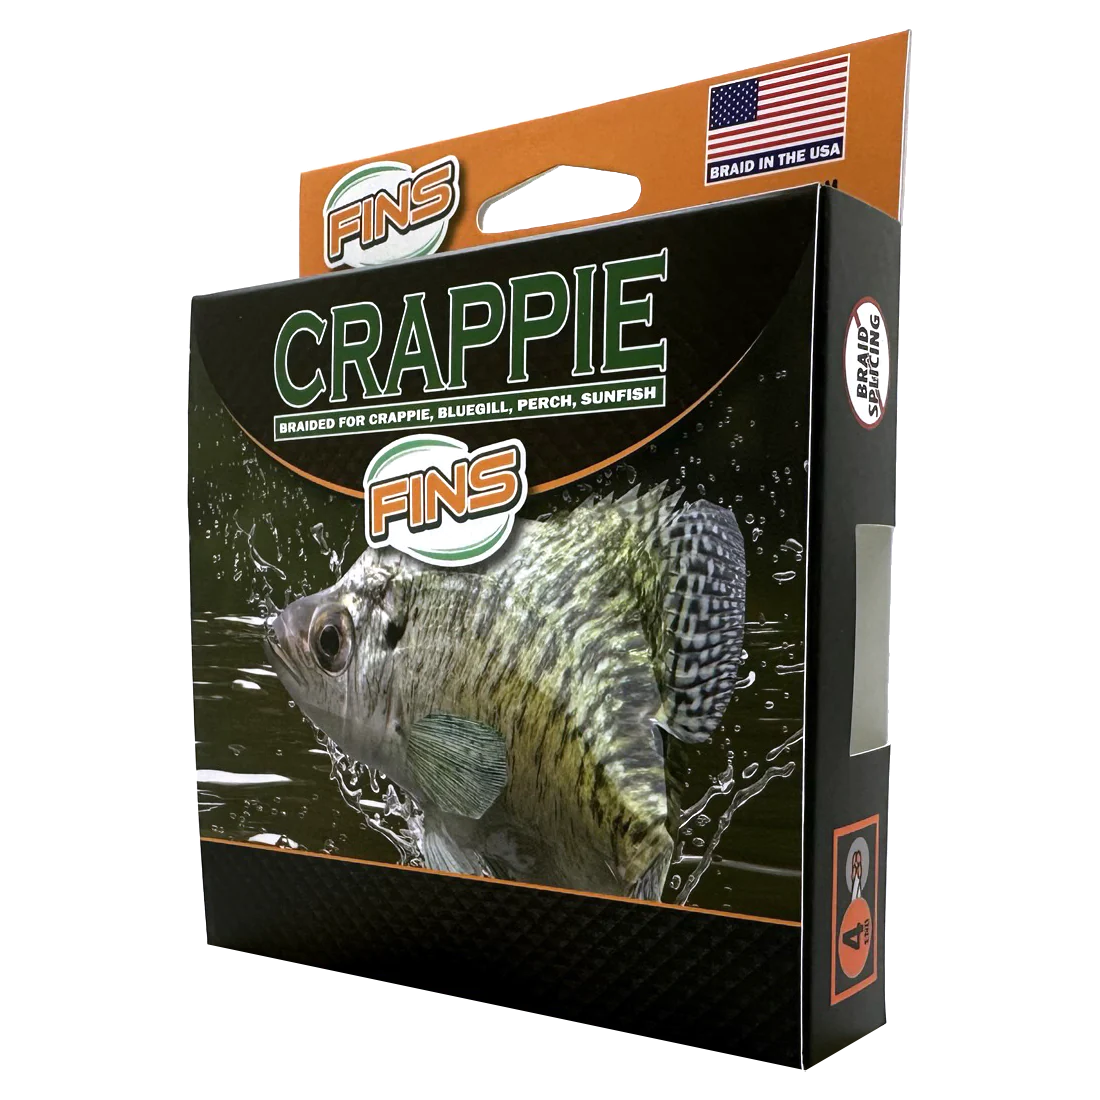 FINS Crappie Fishing Braid – The Fishing Hunting Store